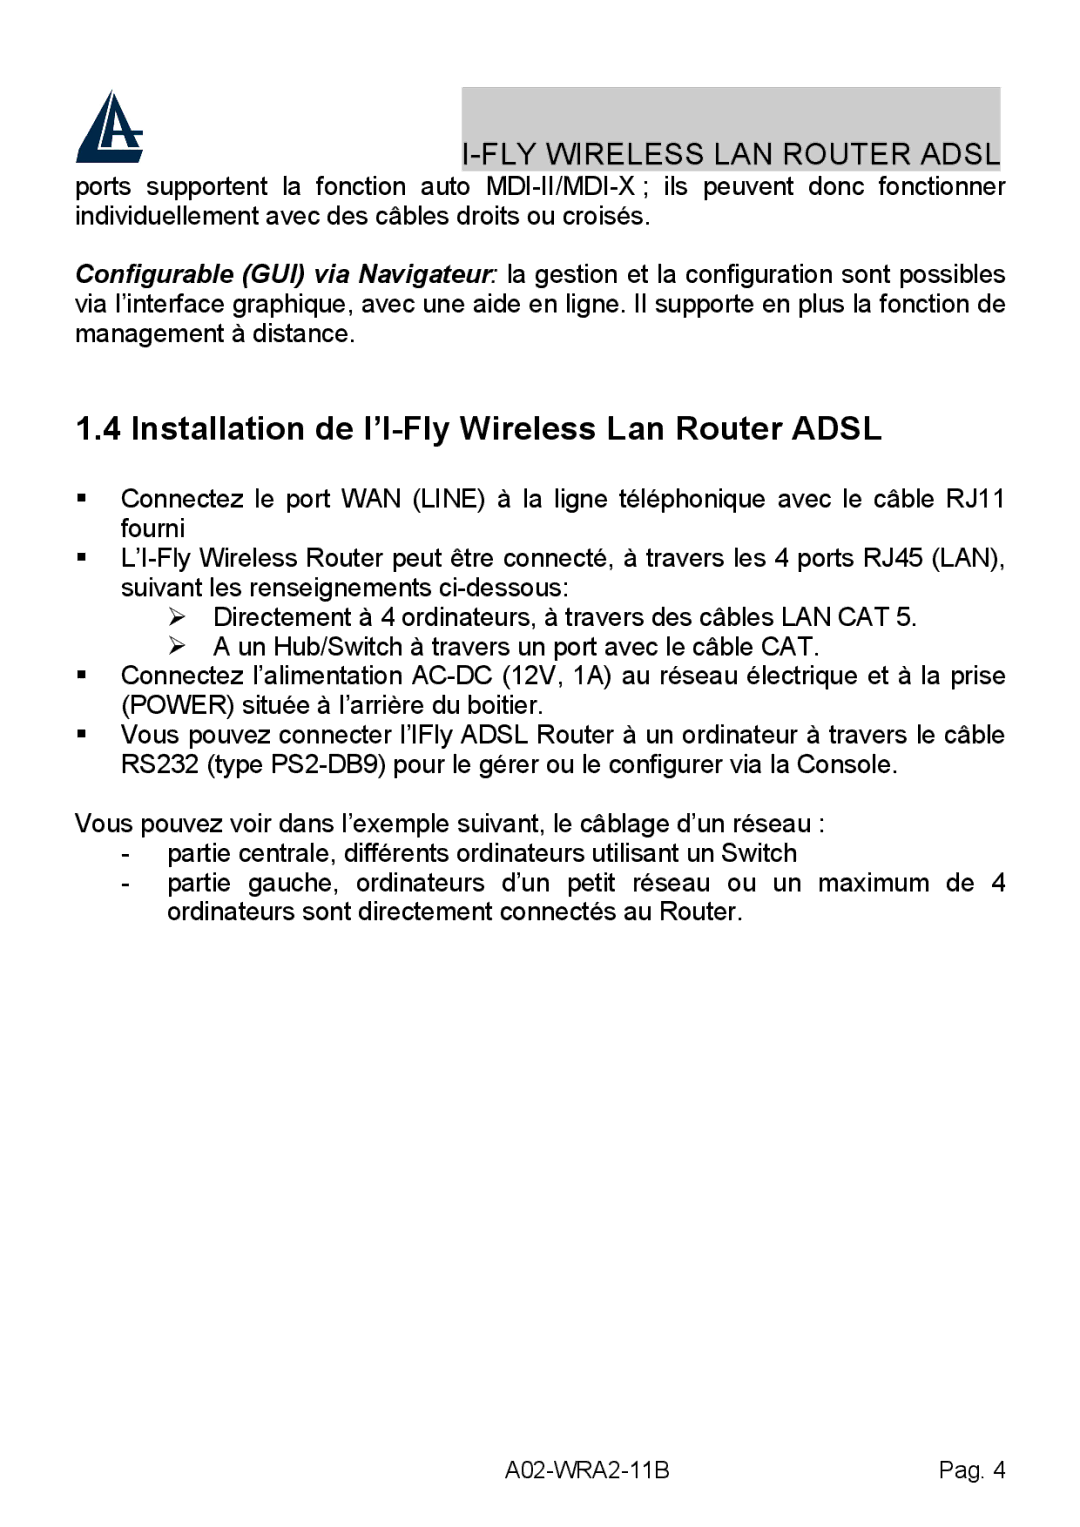 Bissell A02-WRA2-11B manual Installation de l’I-Fly Wireless Lan Router Adsl 